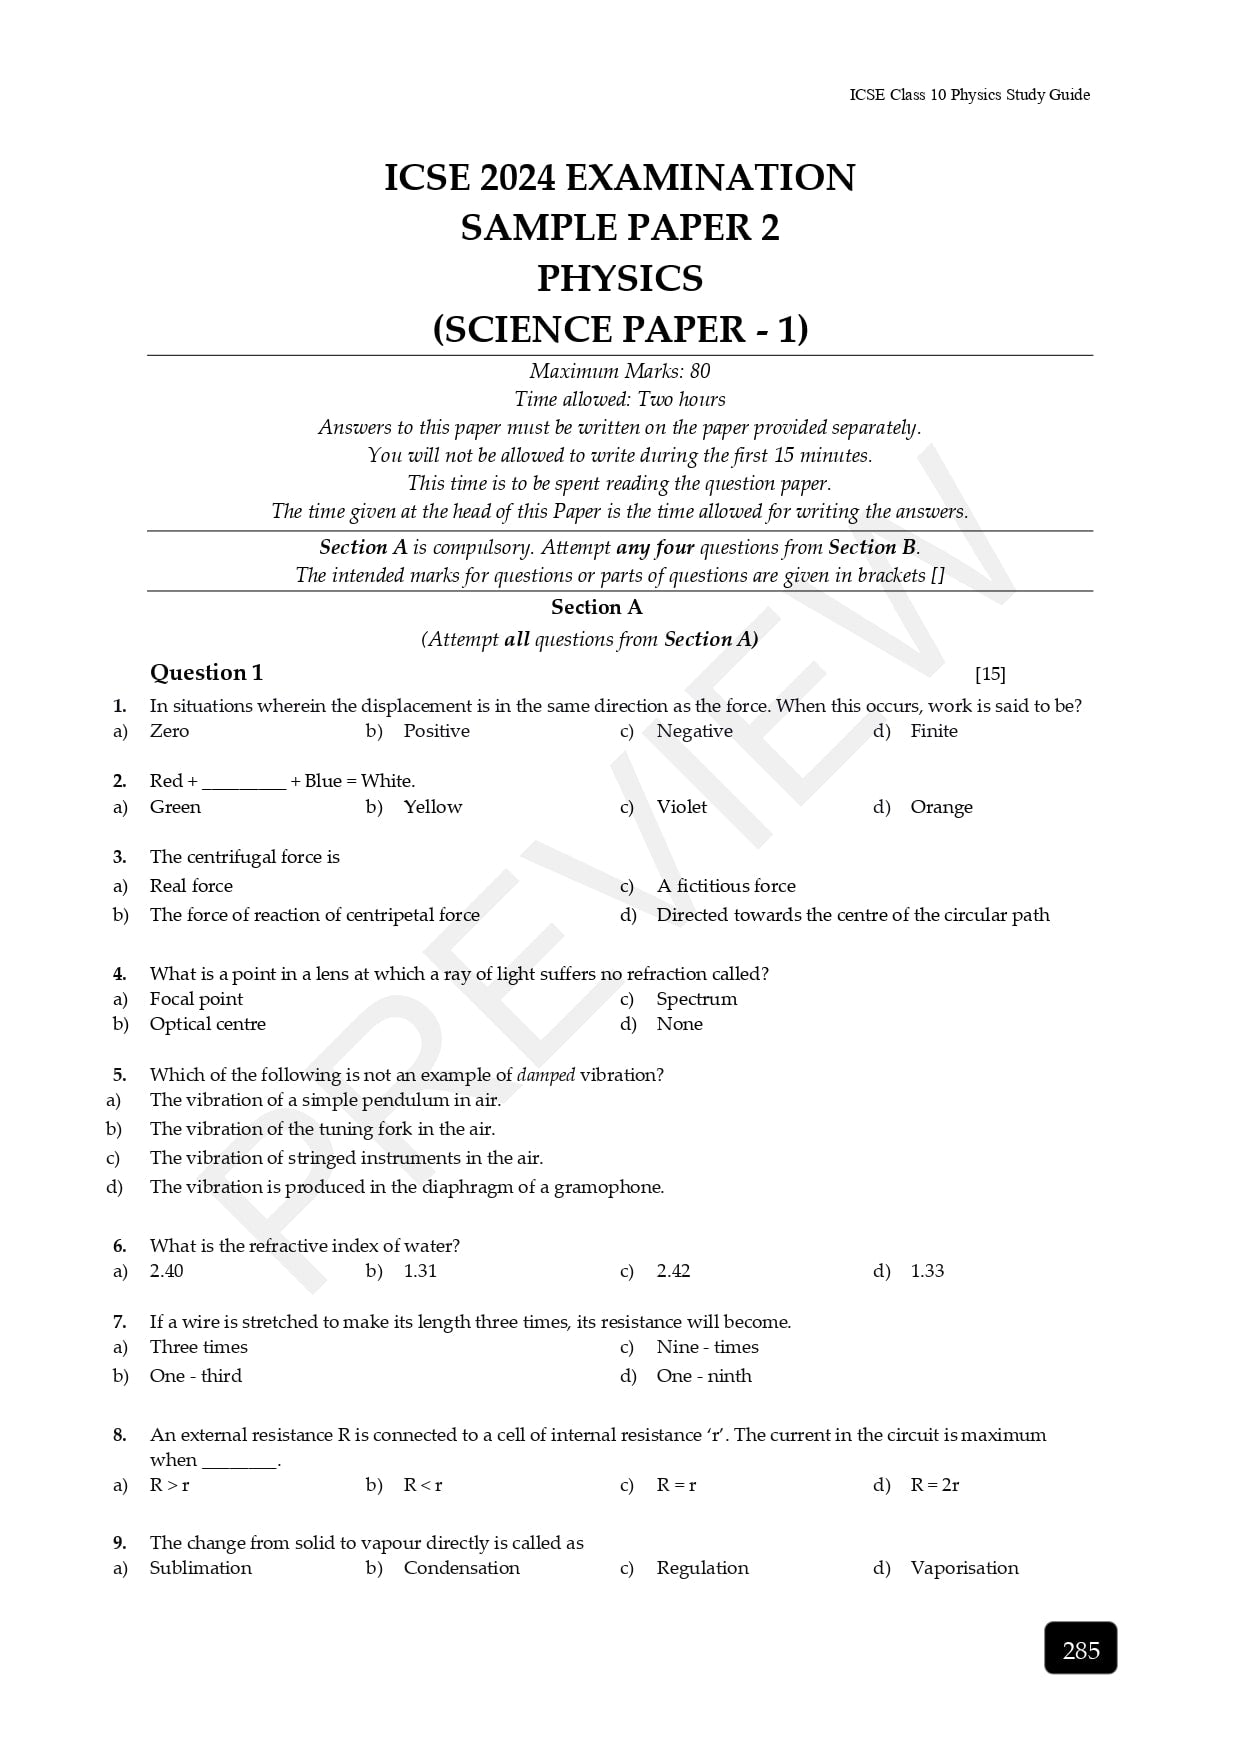 "ICSE Physics practicals for Class 10